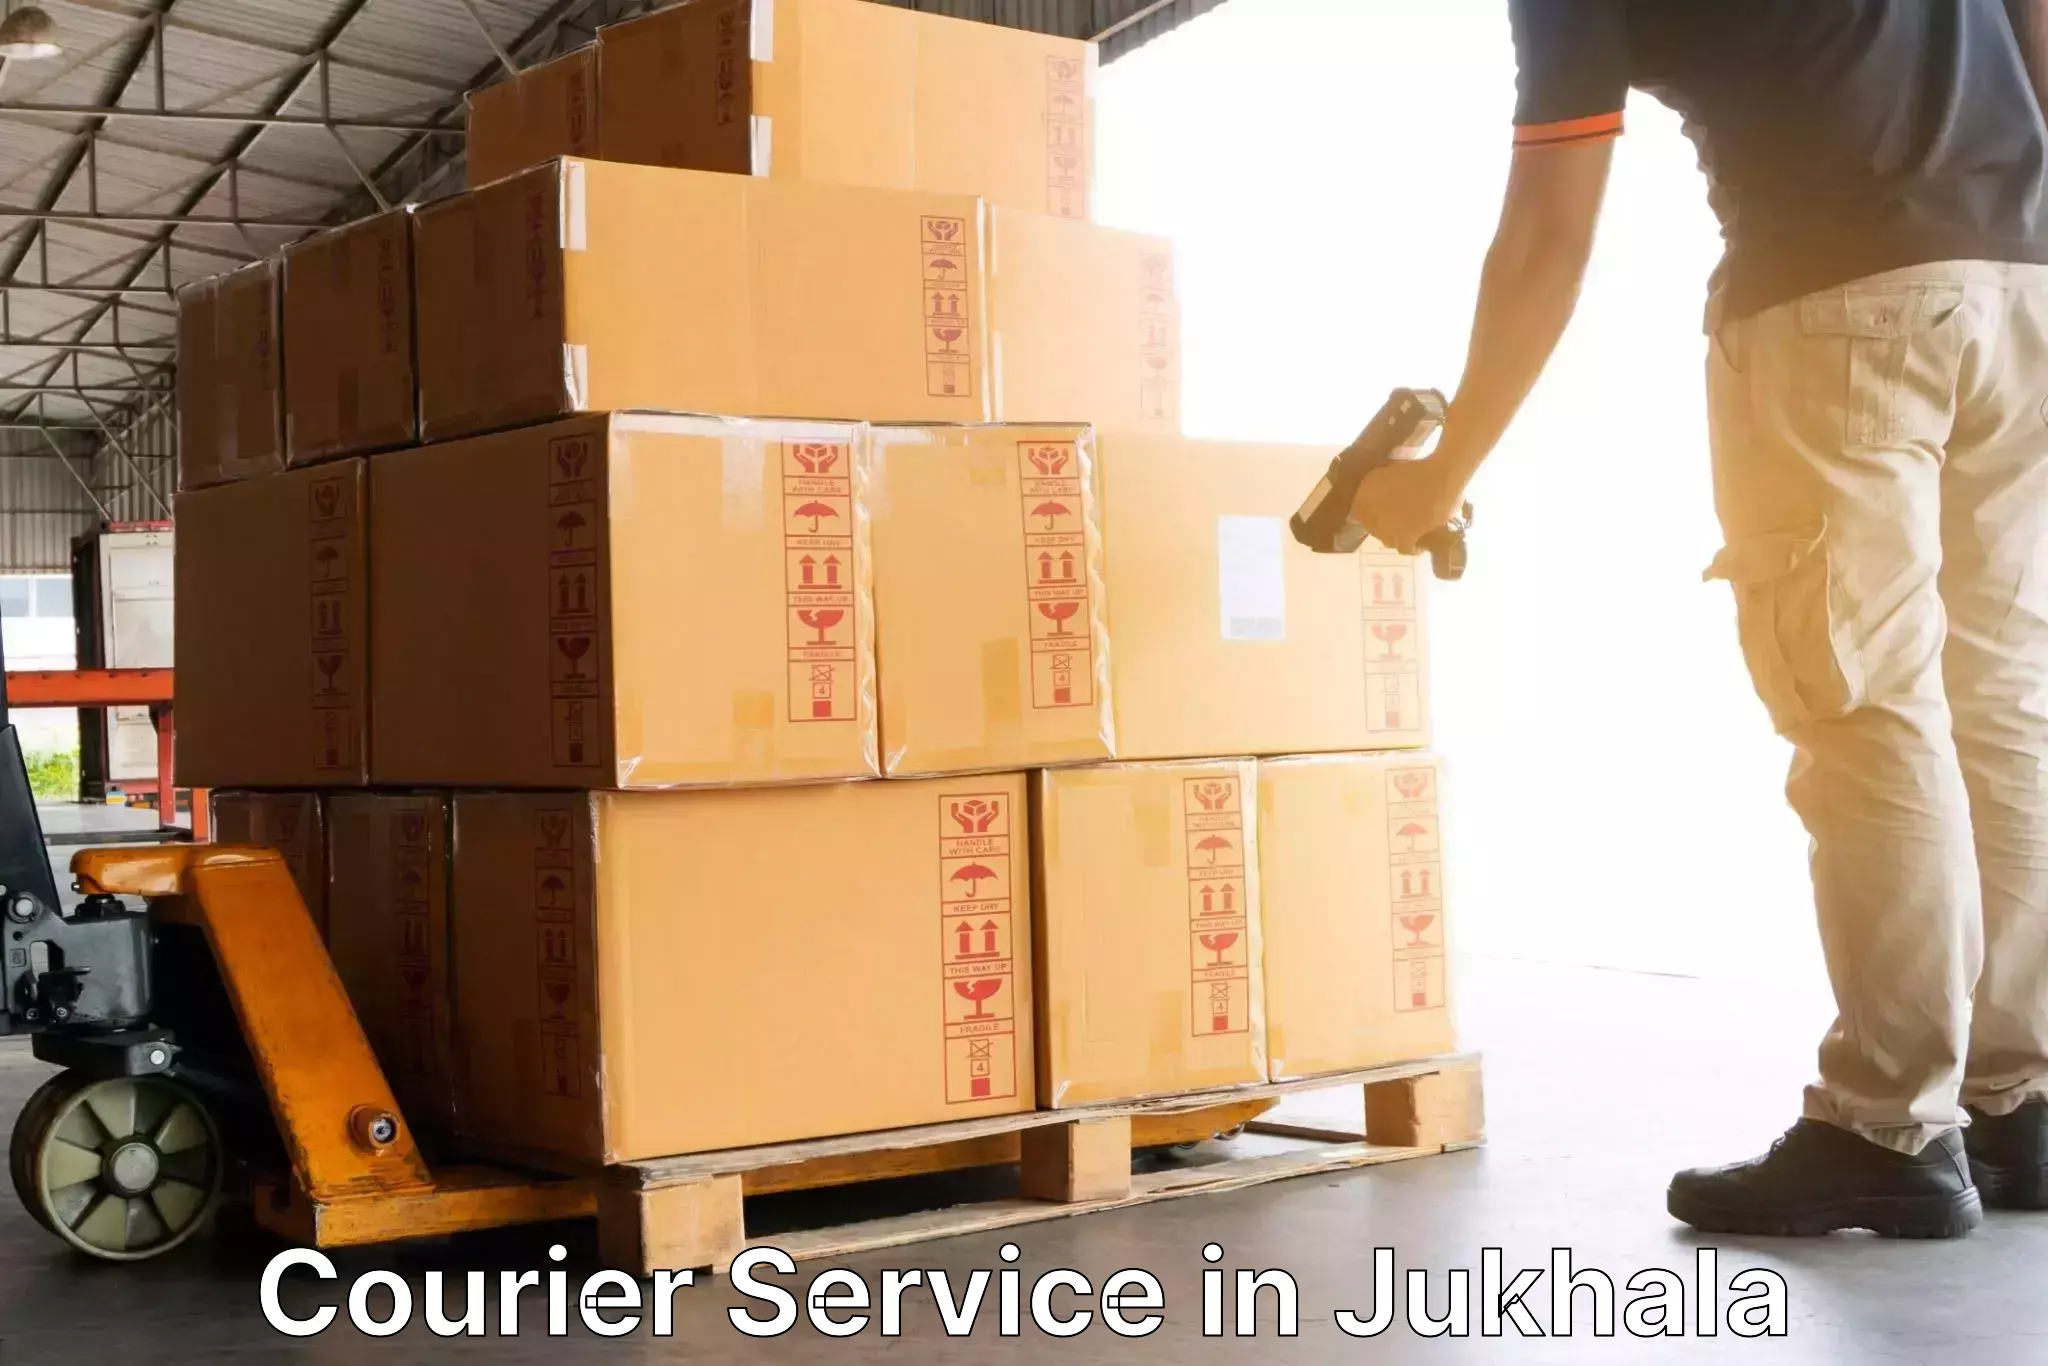 Supply chain delivery in Jukhala